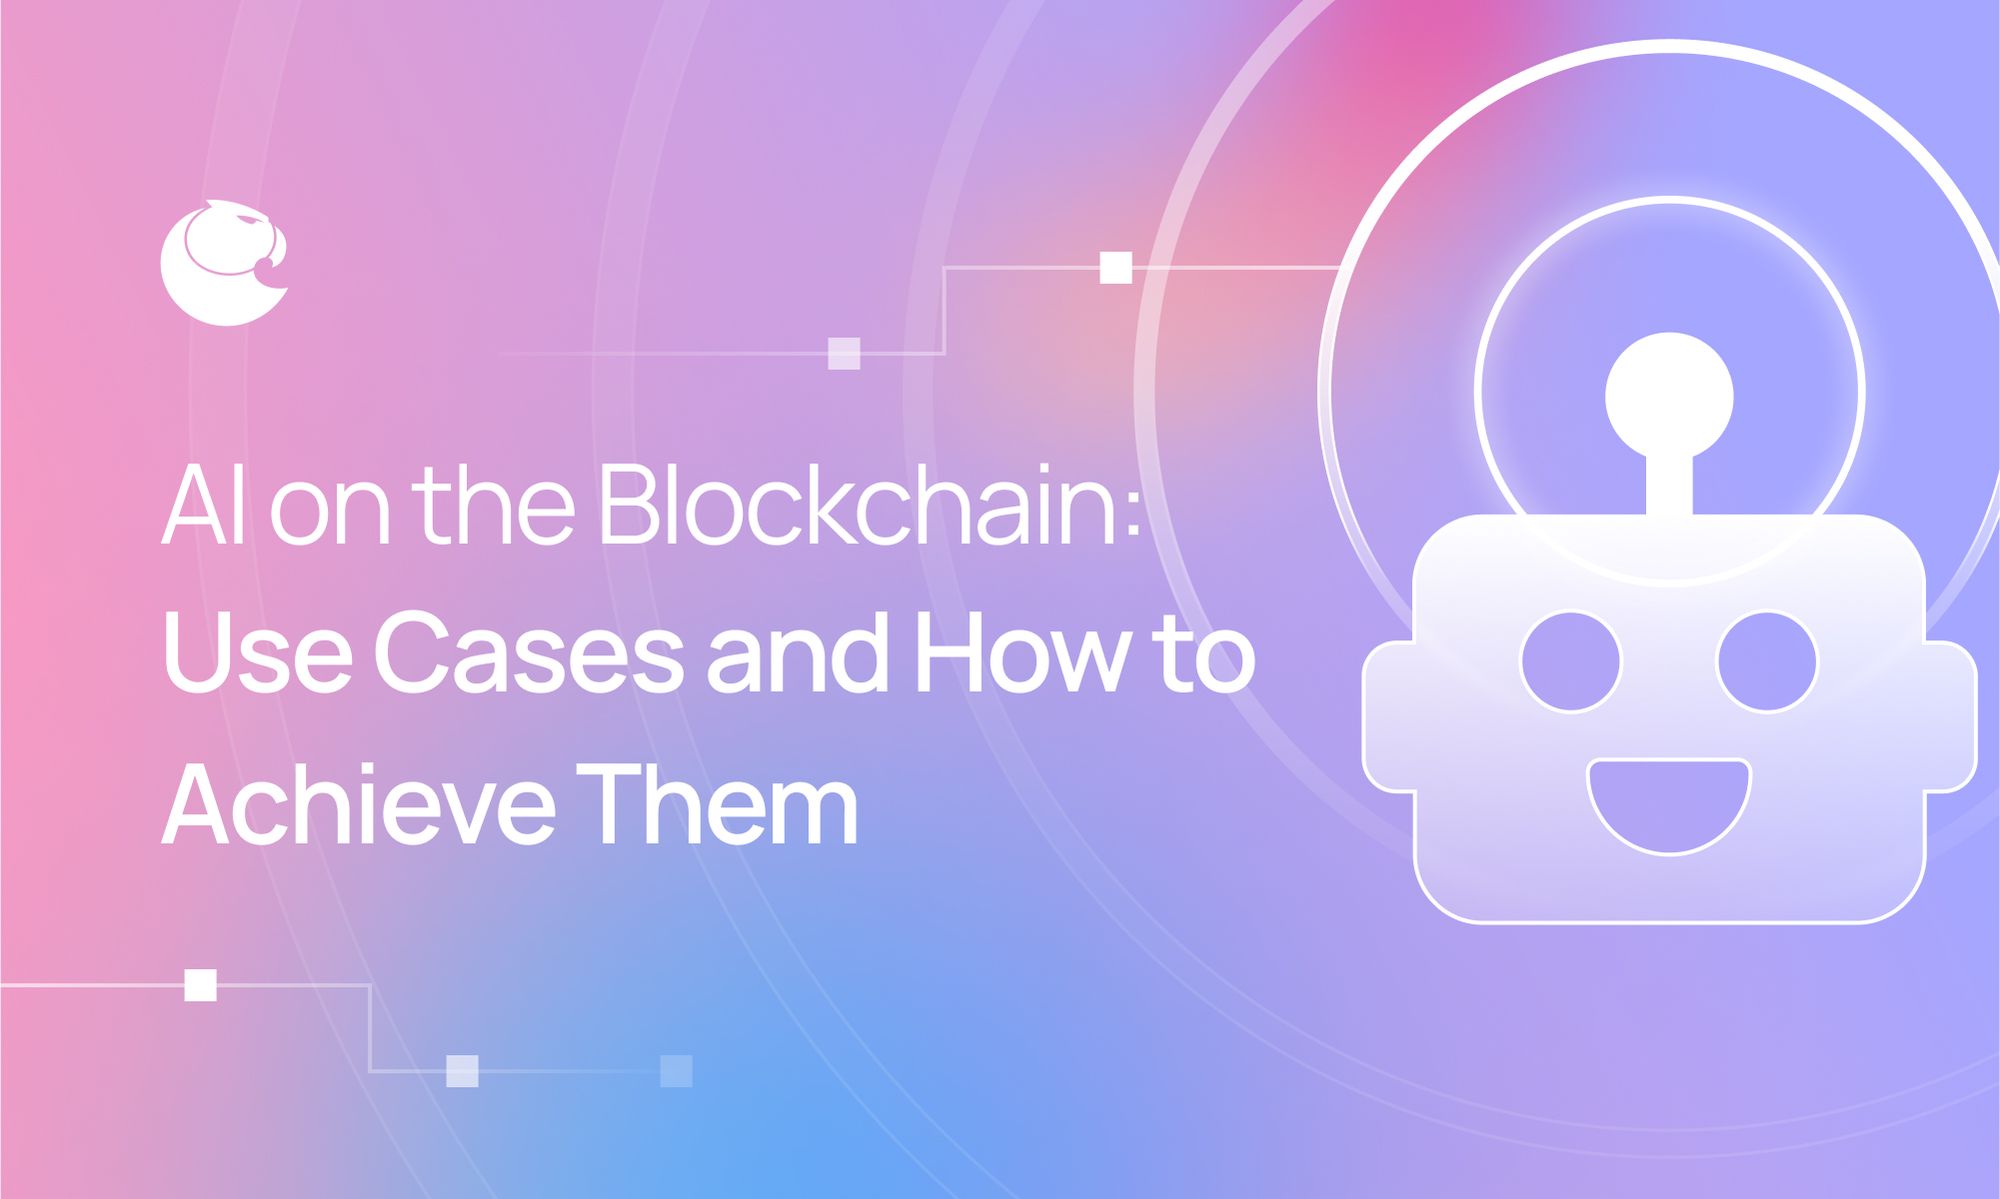 AI on the Blockchain: Use Cases and How to Achieve Them